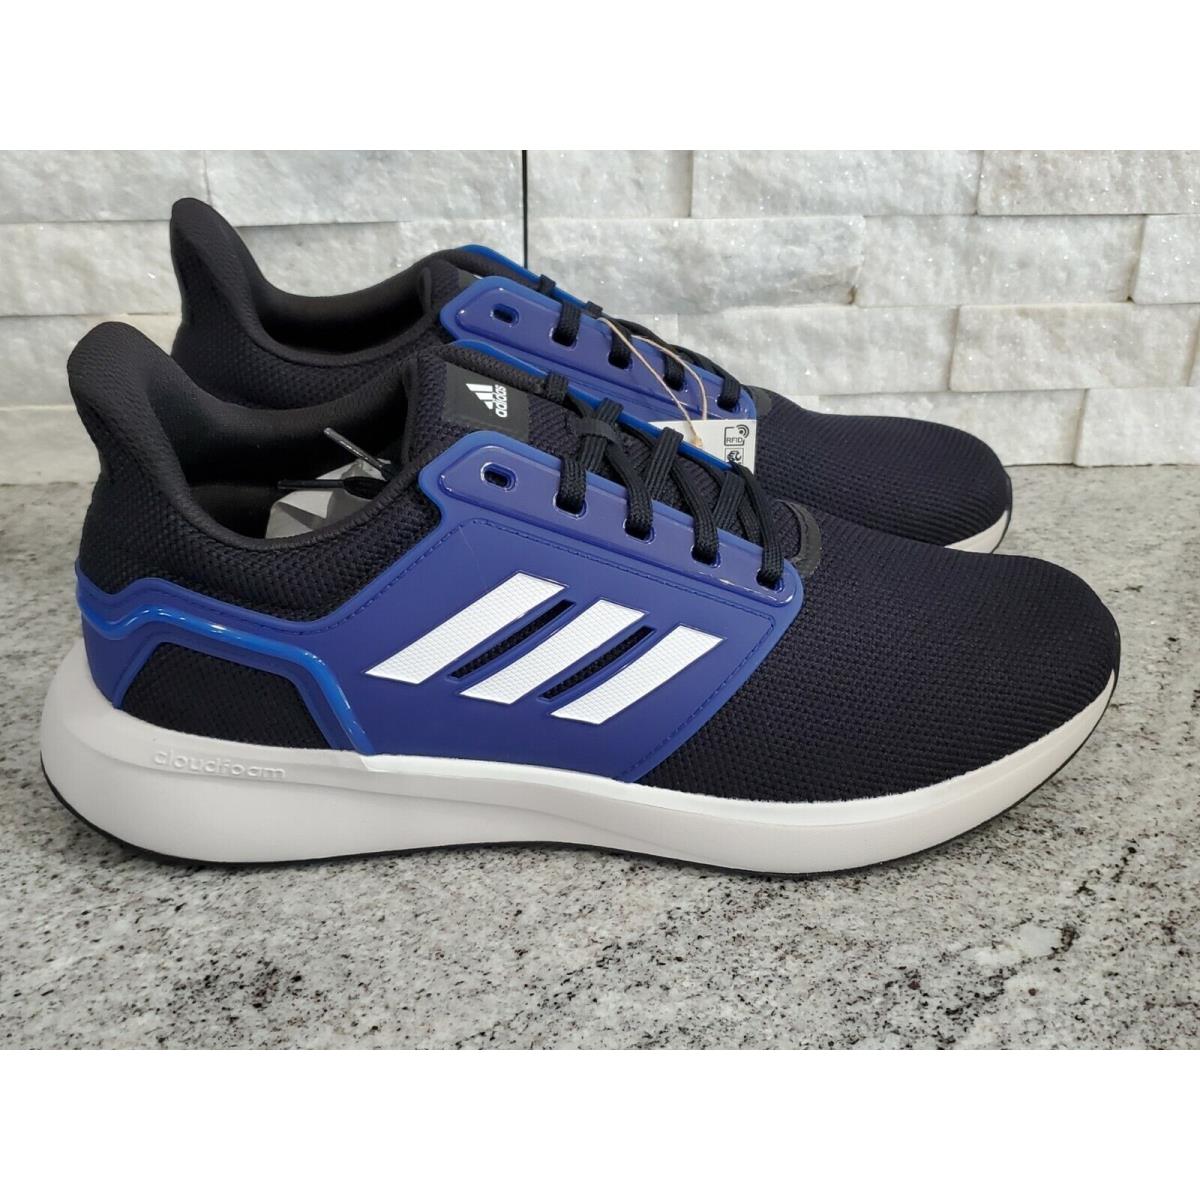 Adidas EQ19 Run Winter Black Lace-up Low Top Running Shoes For 8.5M | 191984983189 Adidas - Black | SporTipTop